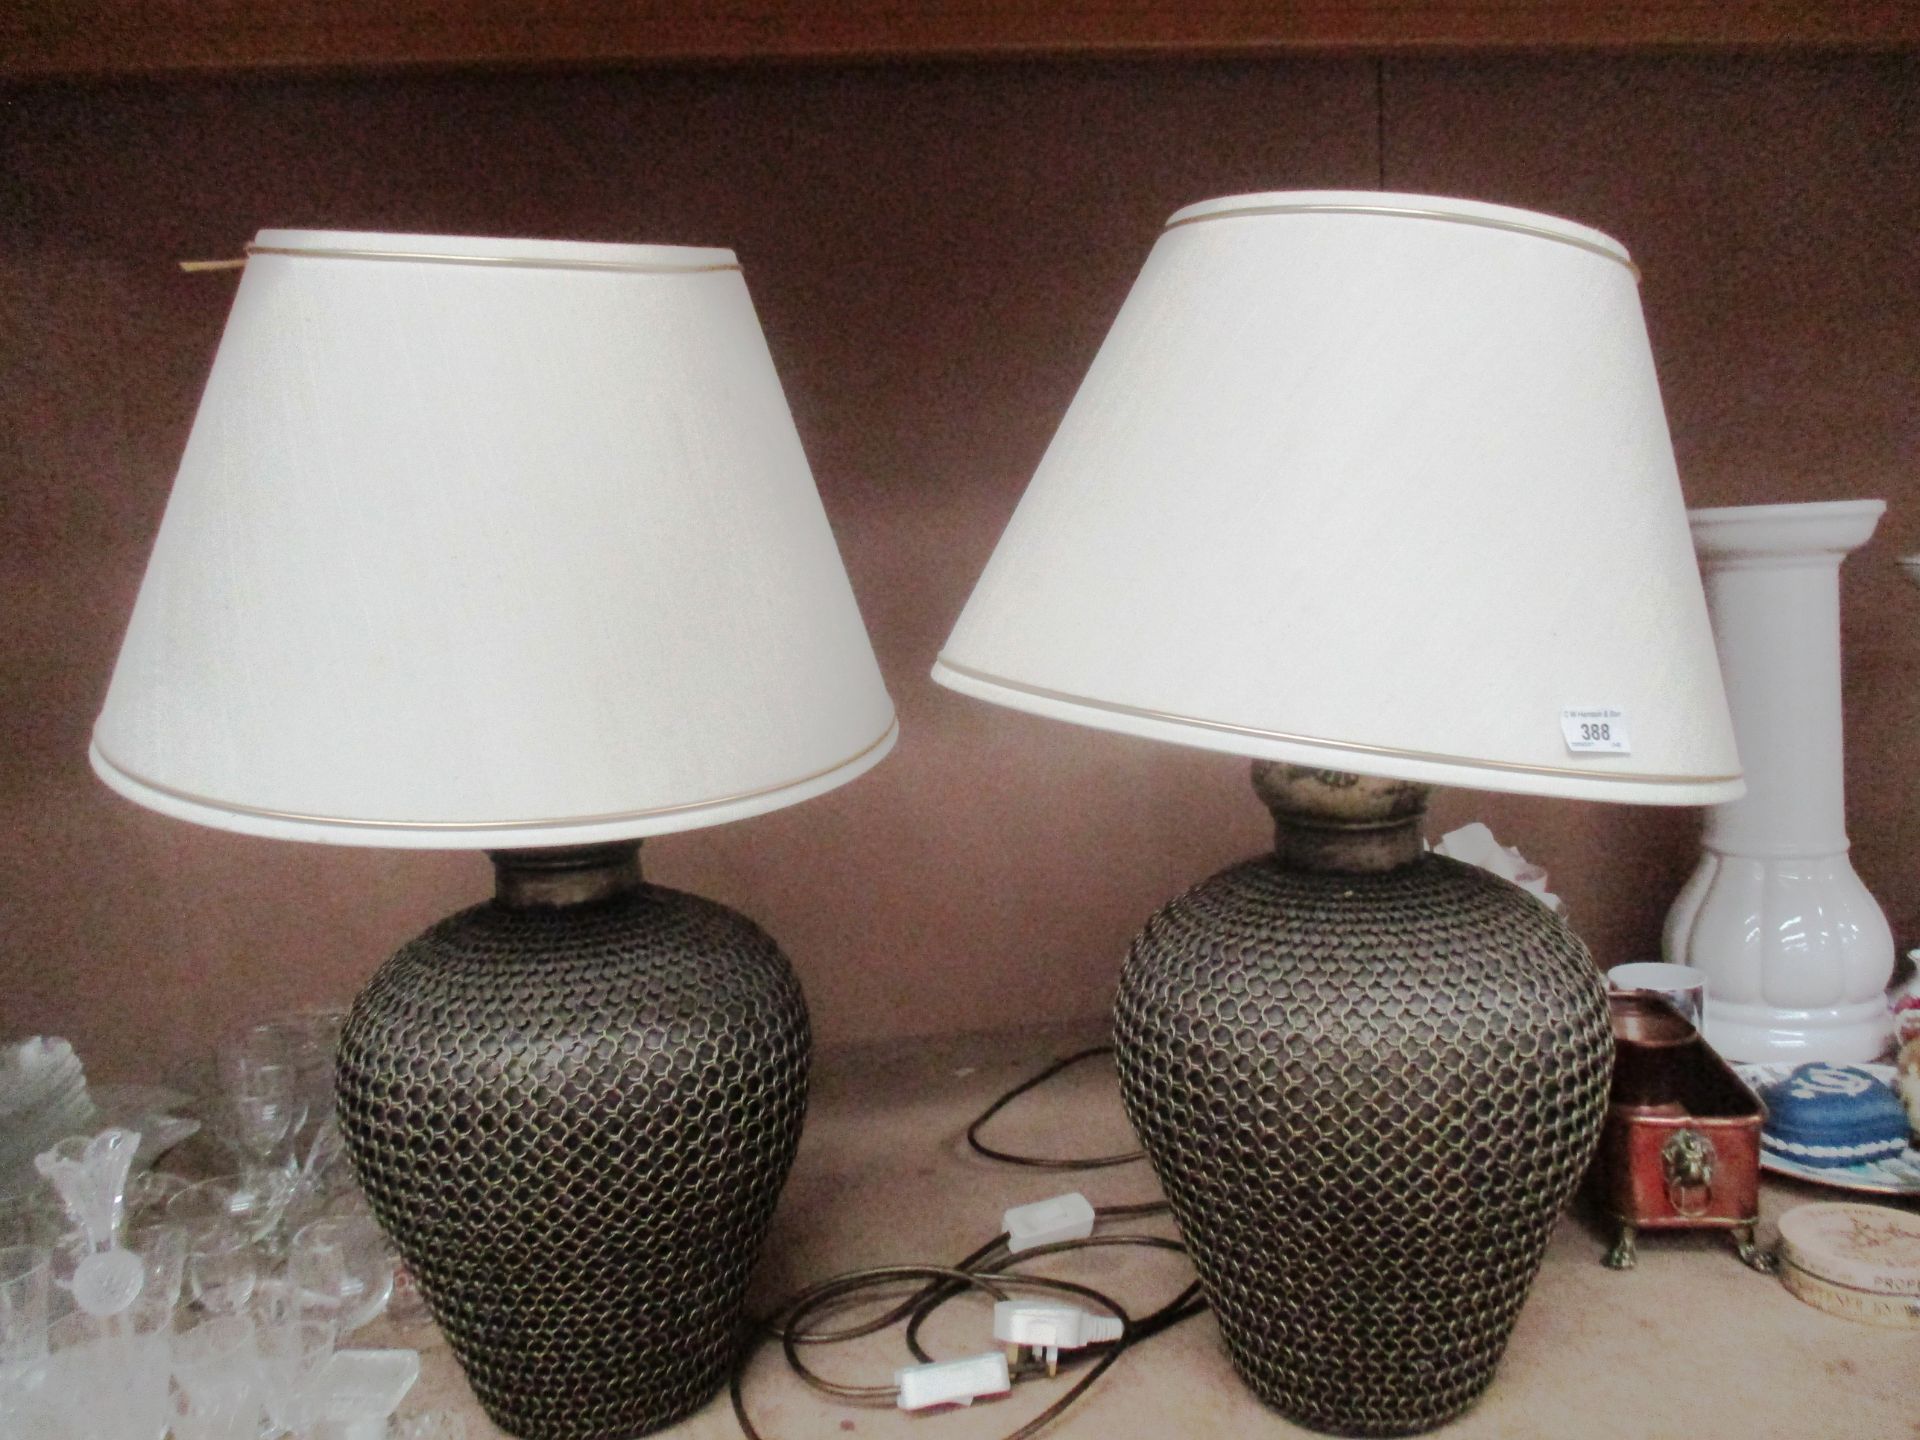 A pair of multi chain design vase lamps with cream shades